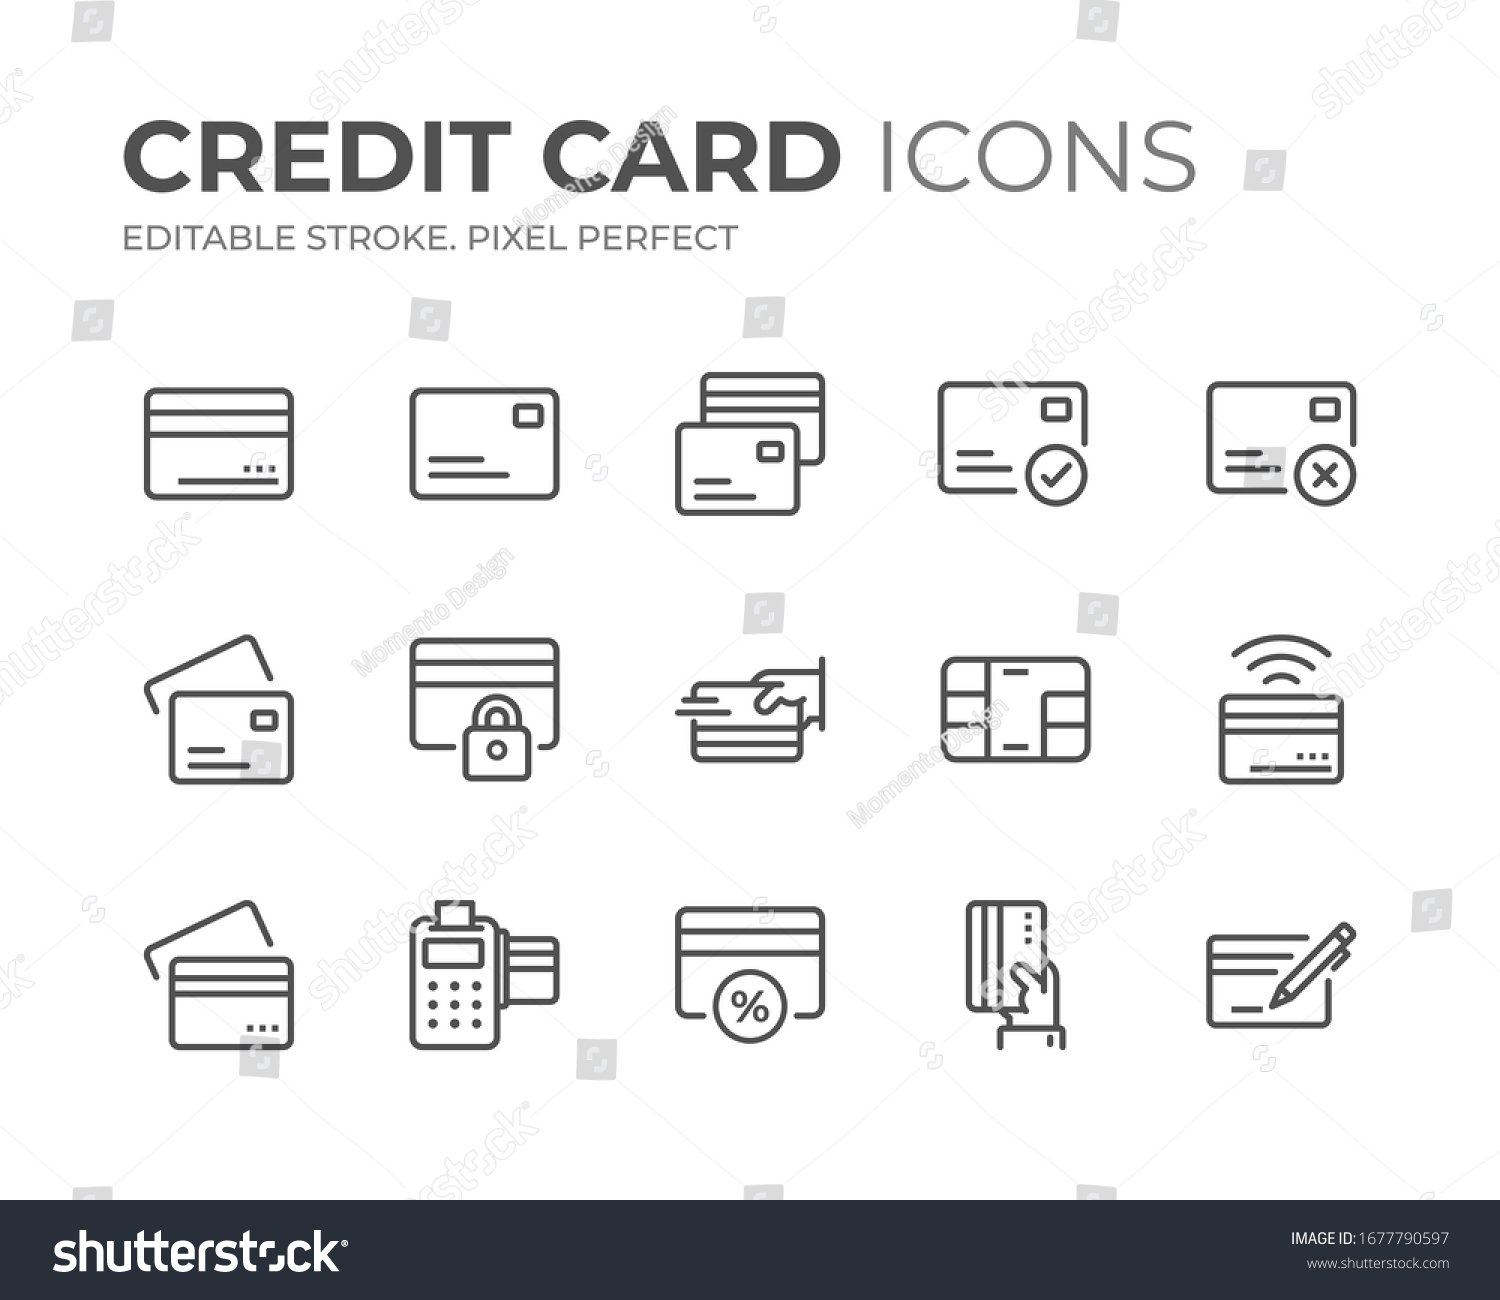 Simple Set of Credit Card Line Icons. Editable Stroke. Pixel Perfect. #1677790597